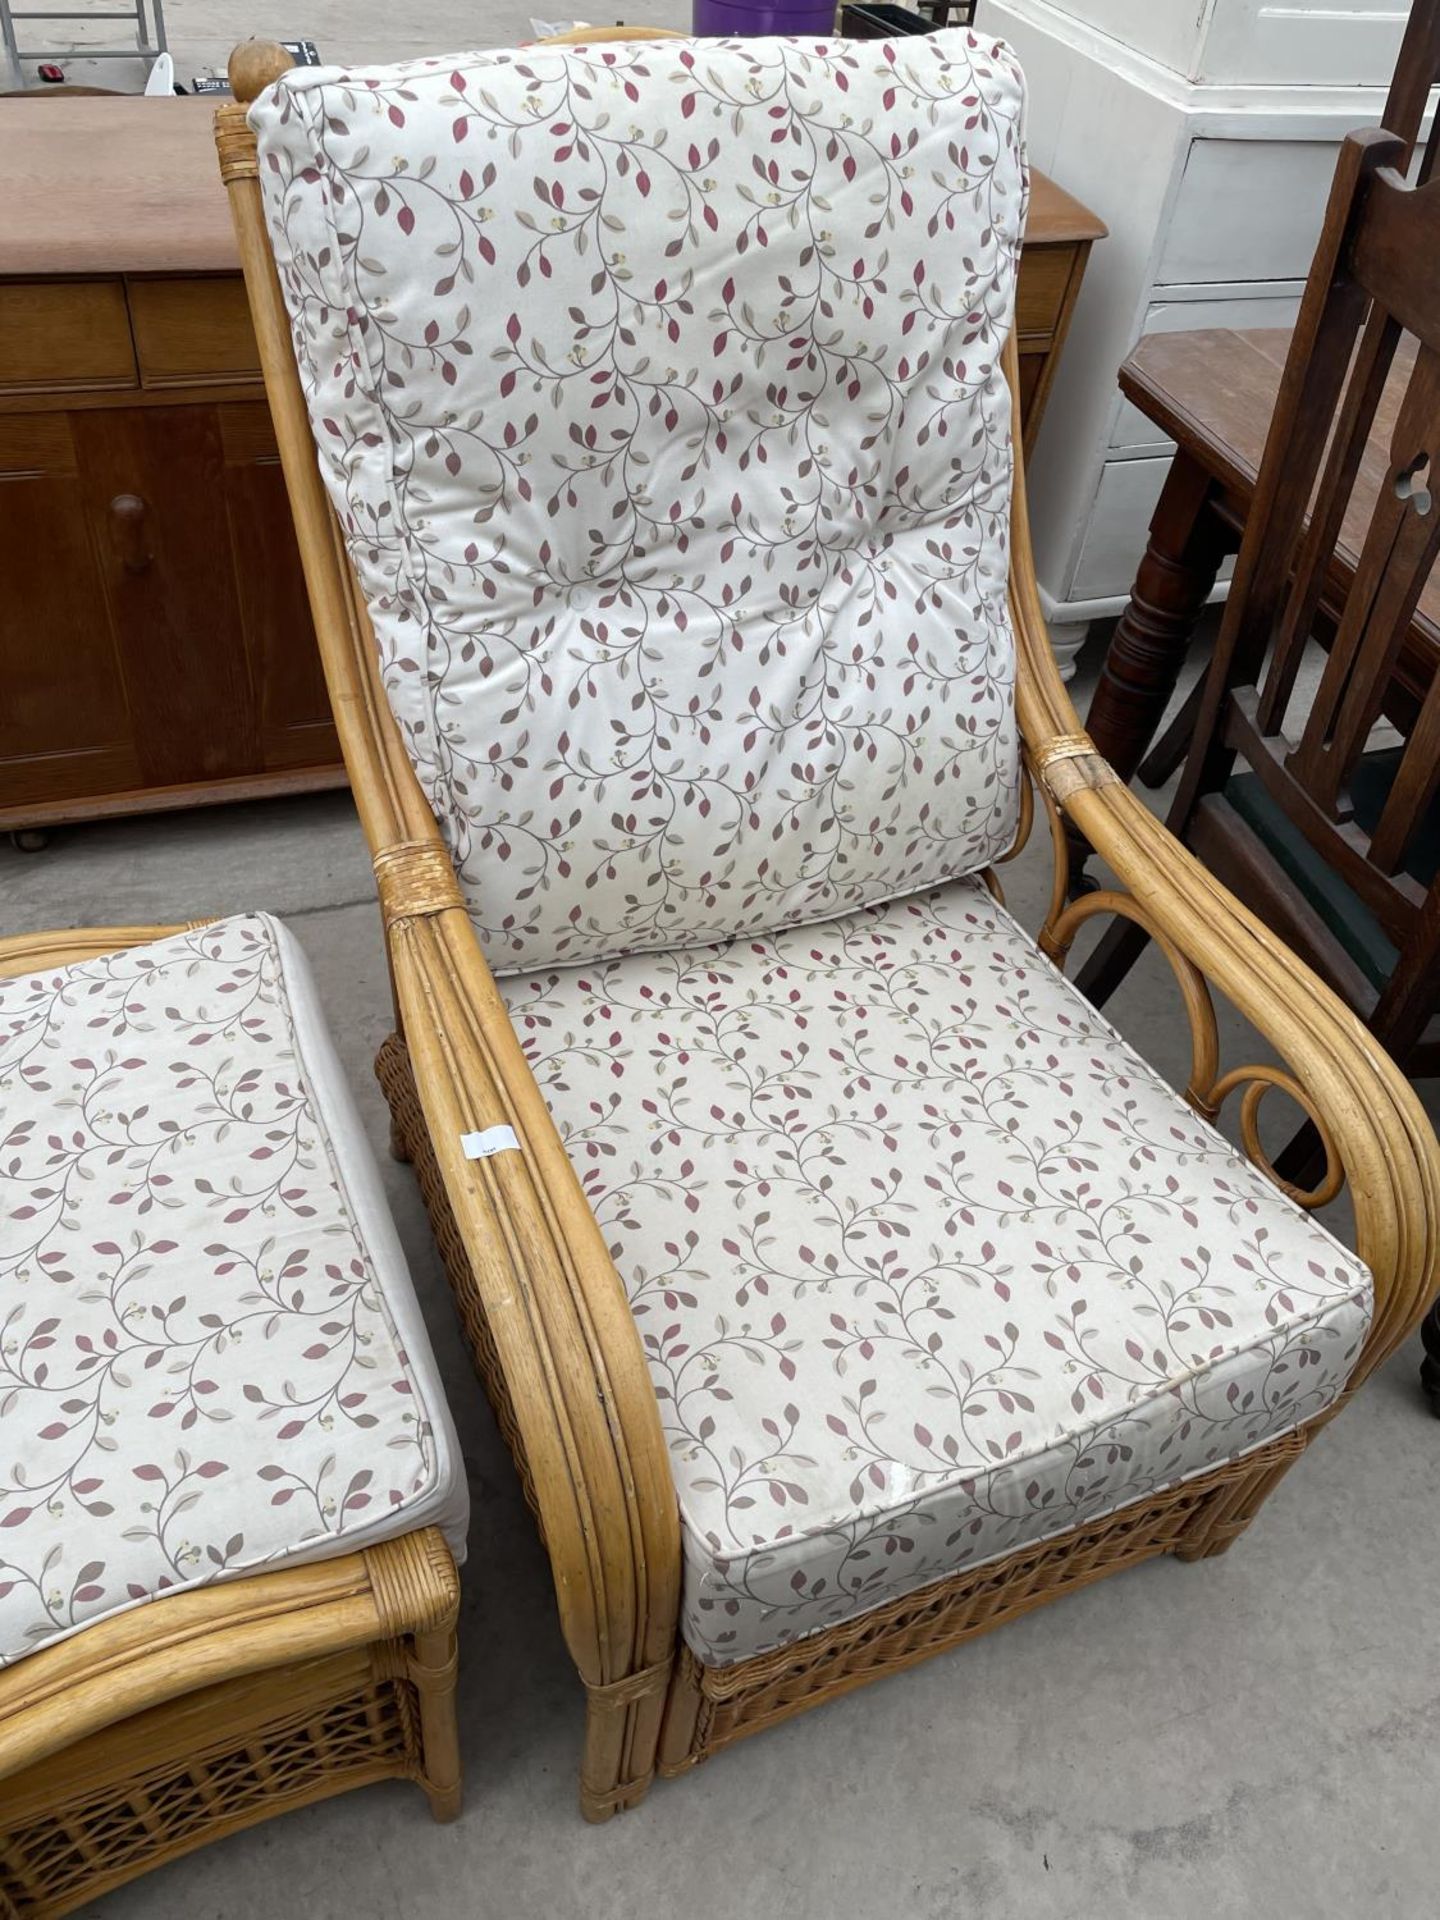 2 WICKER AND BAMBOO CONSERVATORY CHAIRS PLUS A MATCHING STOOL - Image 4 of 4